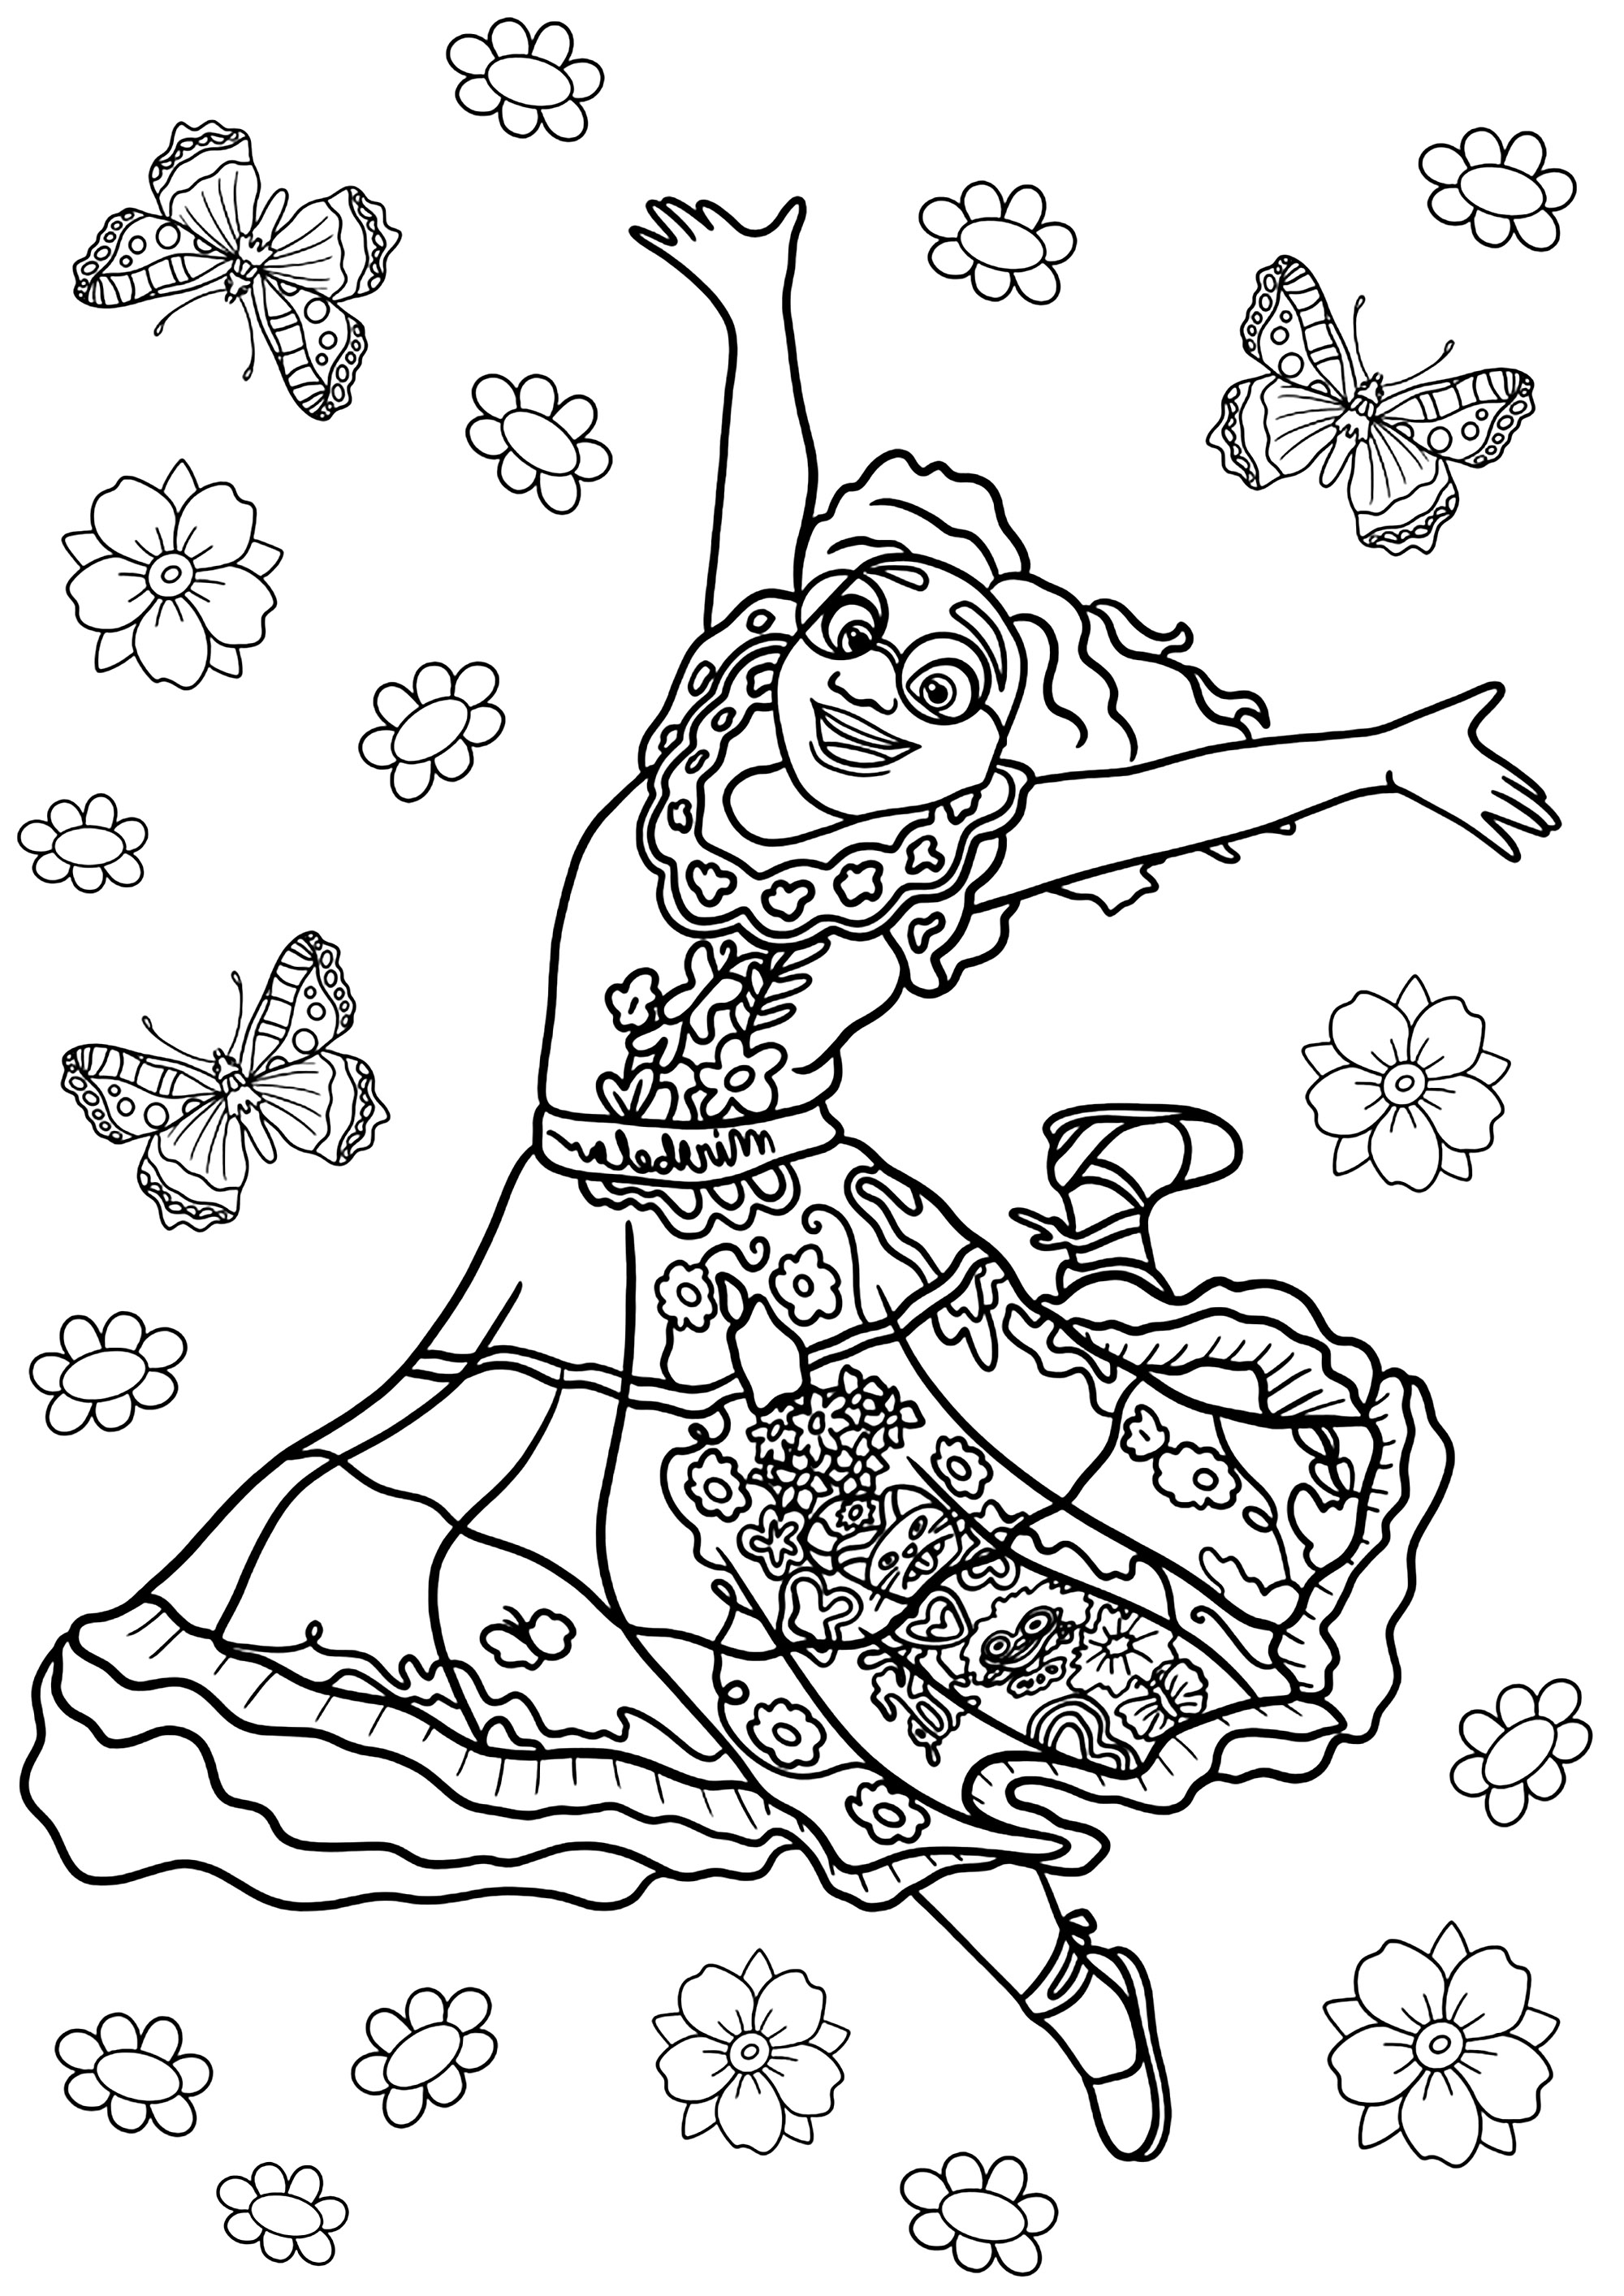 Encanto coloring page: Mirabel jumping among flowers and